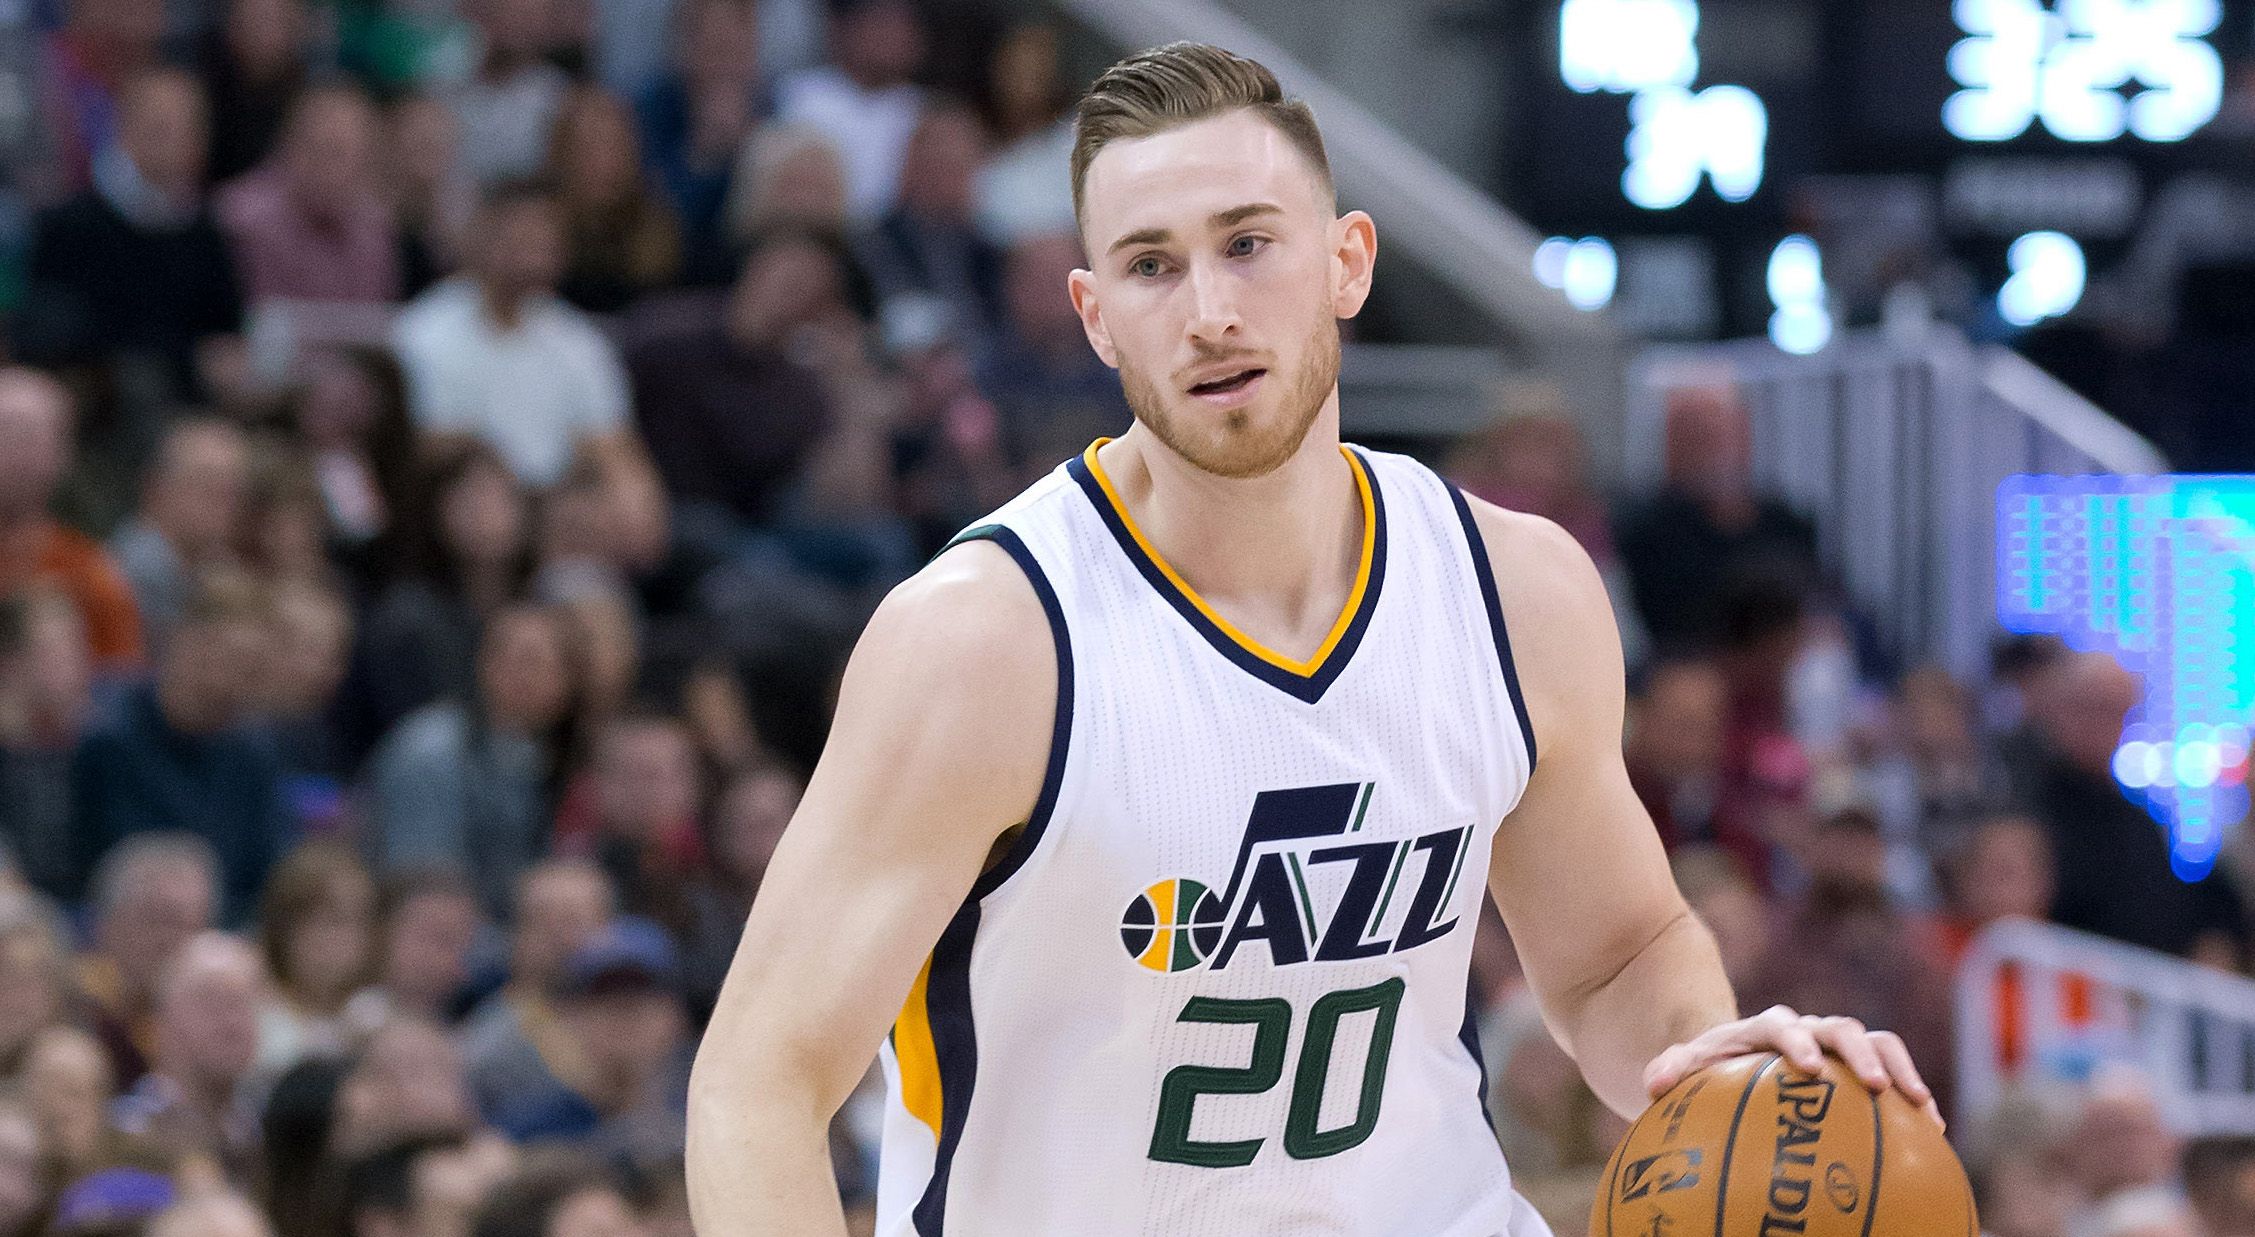 Old tweets show Hayward struggling with decisions.